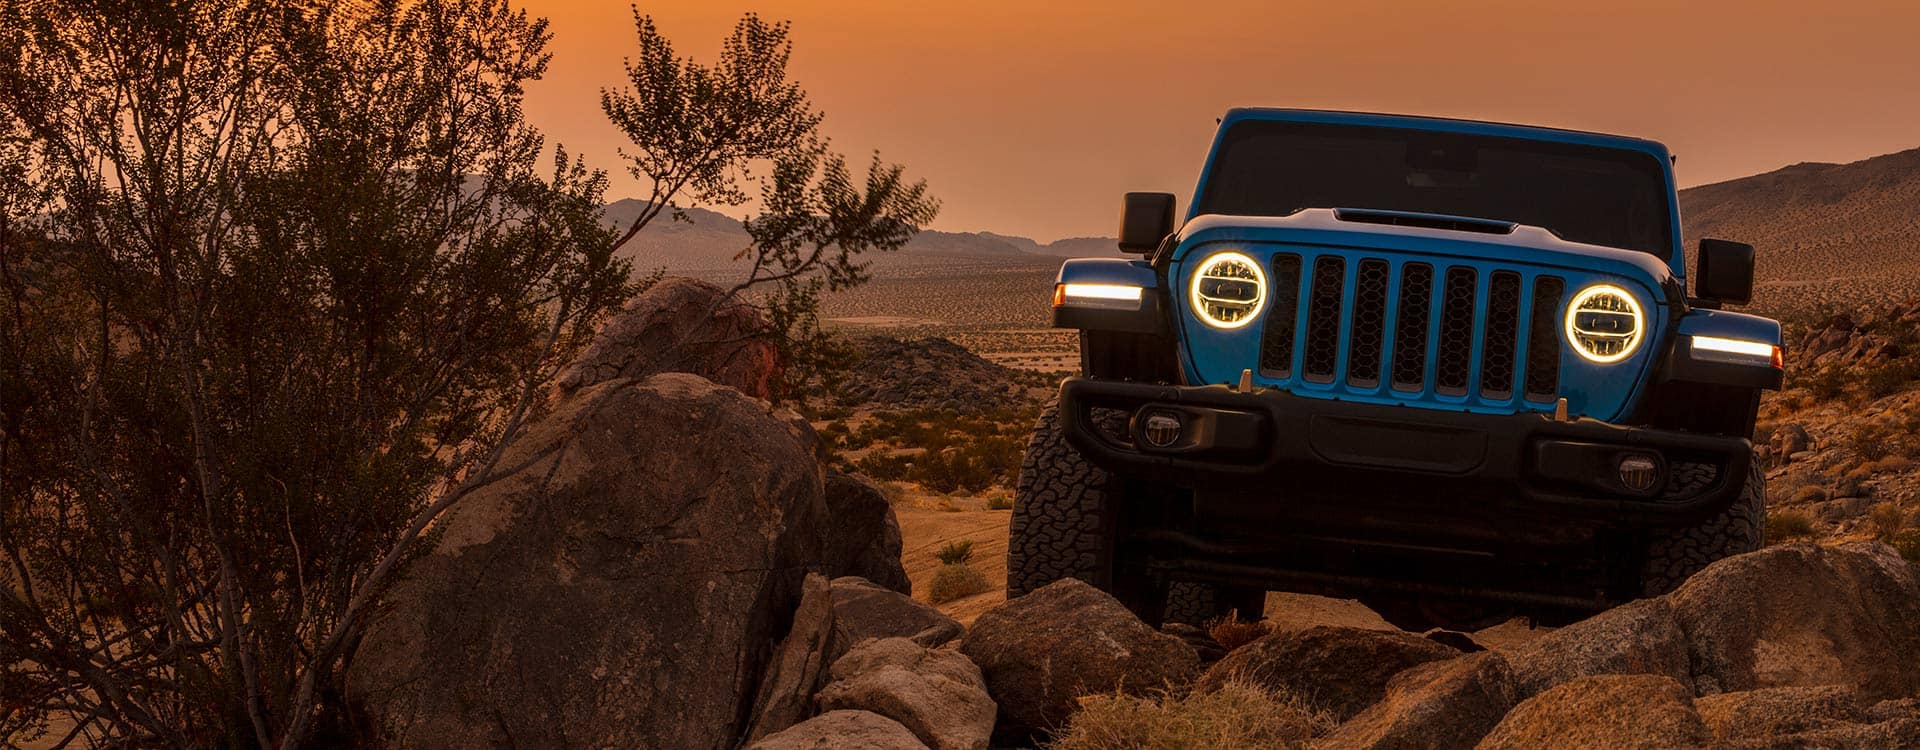 A head-on view of a 2022 Jeep Wrangler Rubicon 392 with its headlamps on, crawling over boulders with a bright orange sky at dusk in the background.